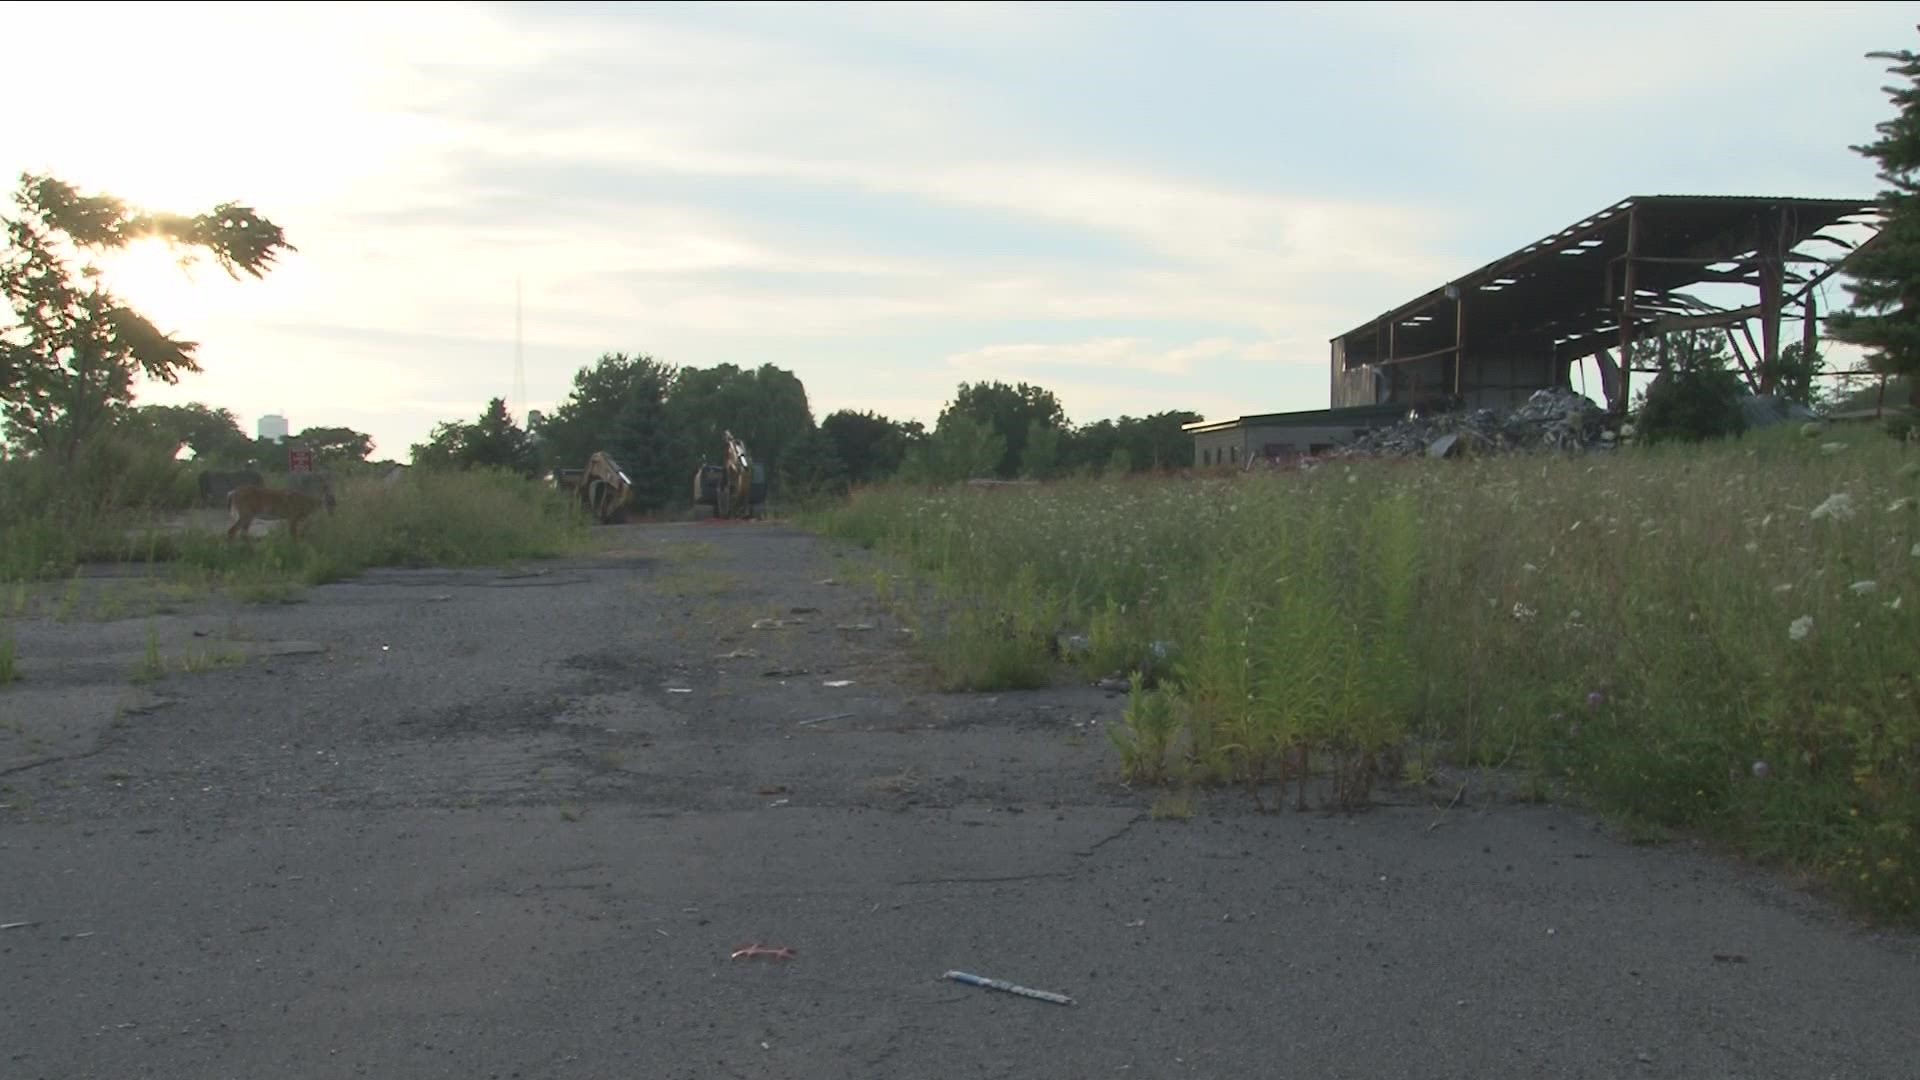 Neighbors in Buffalo's Seneca Babcock community are looking forward to new beginnings, which could start as soon as Monday for an old eye sore.